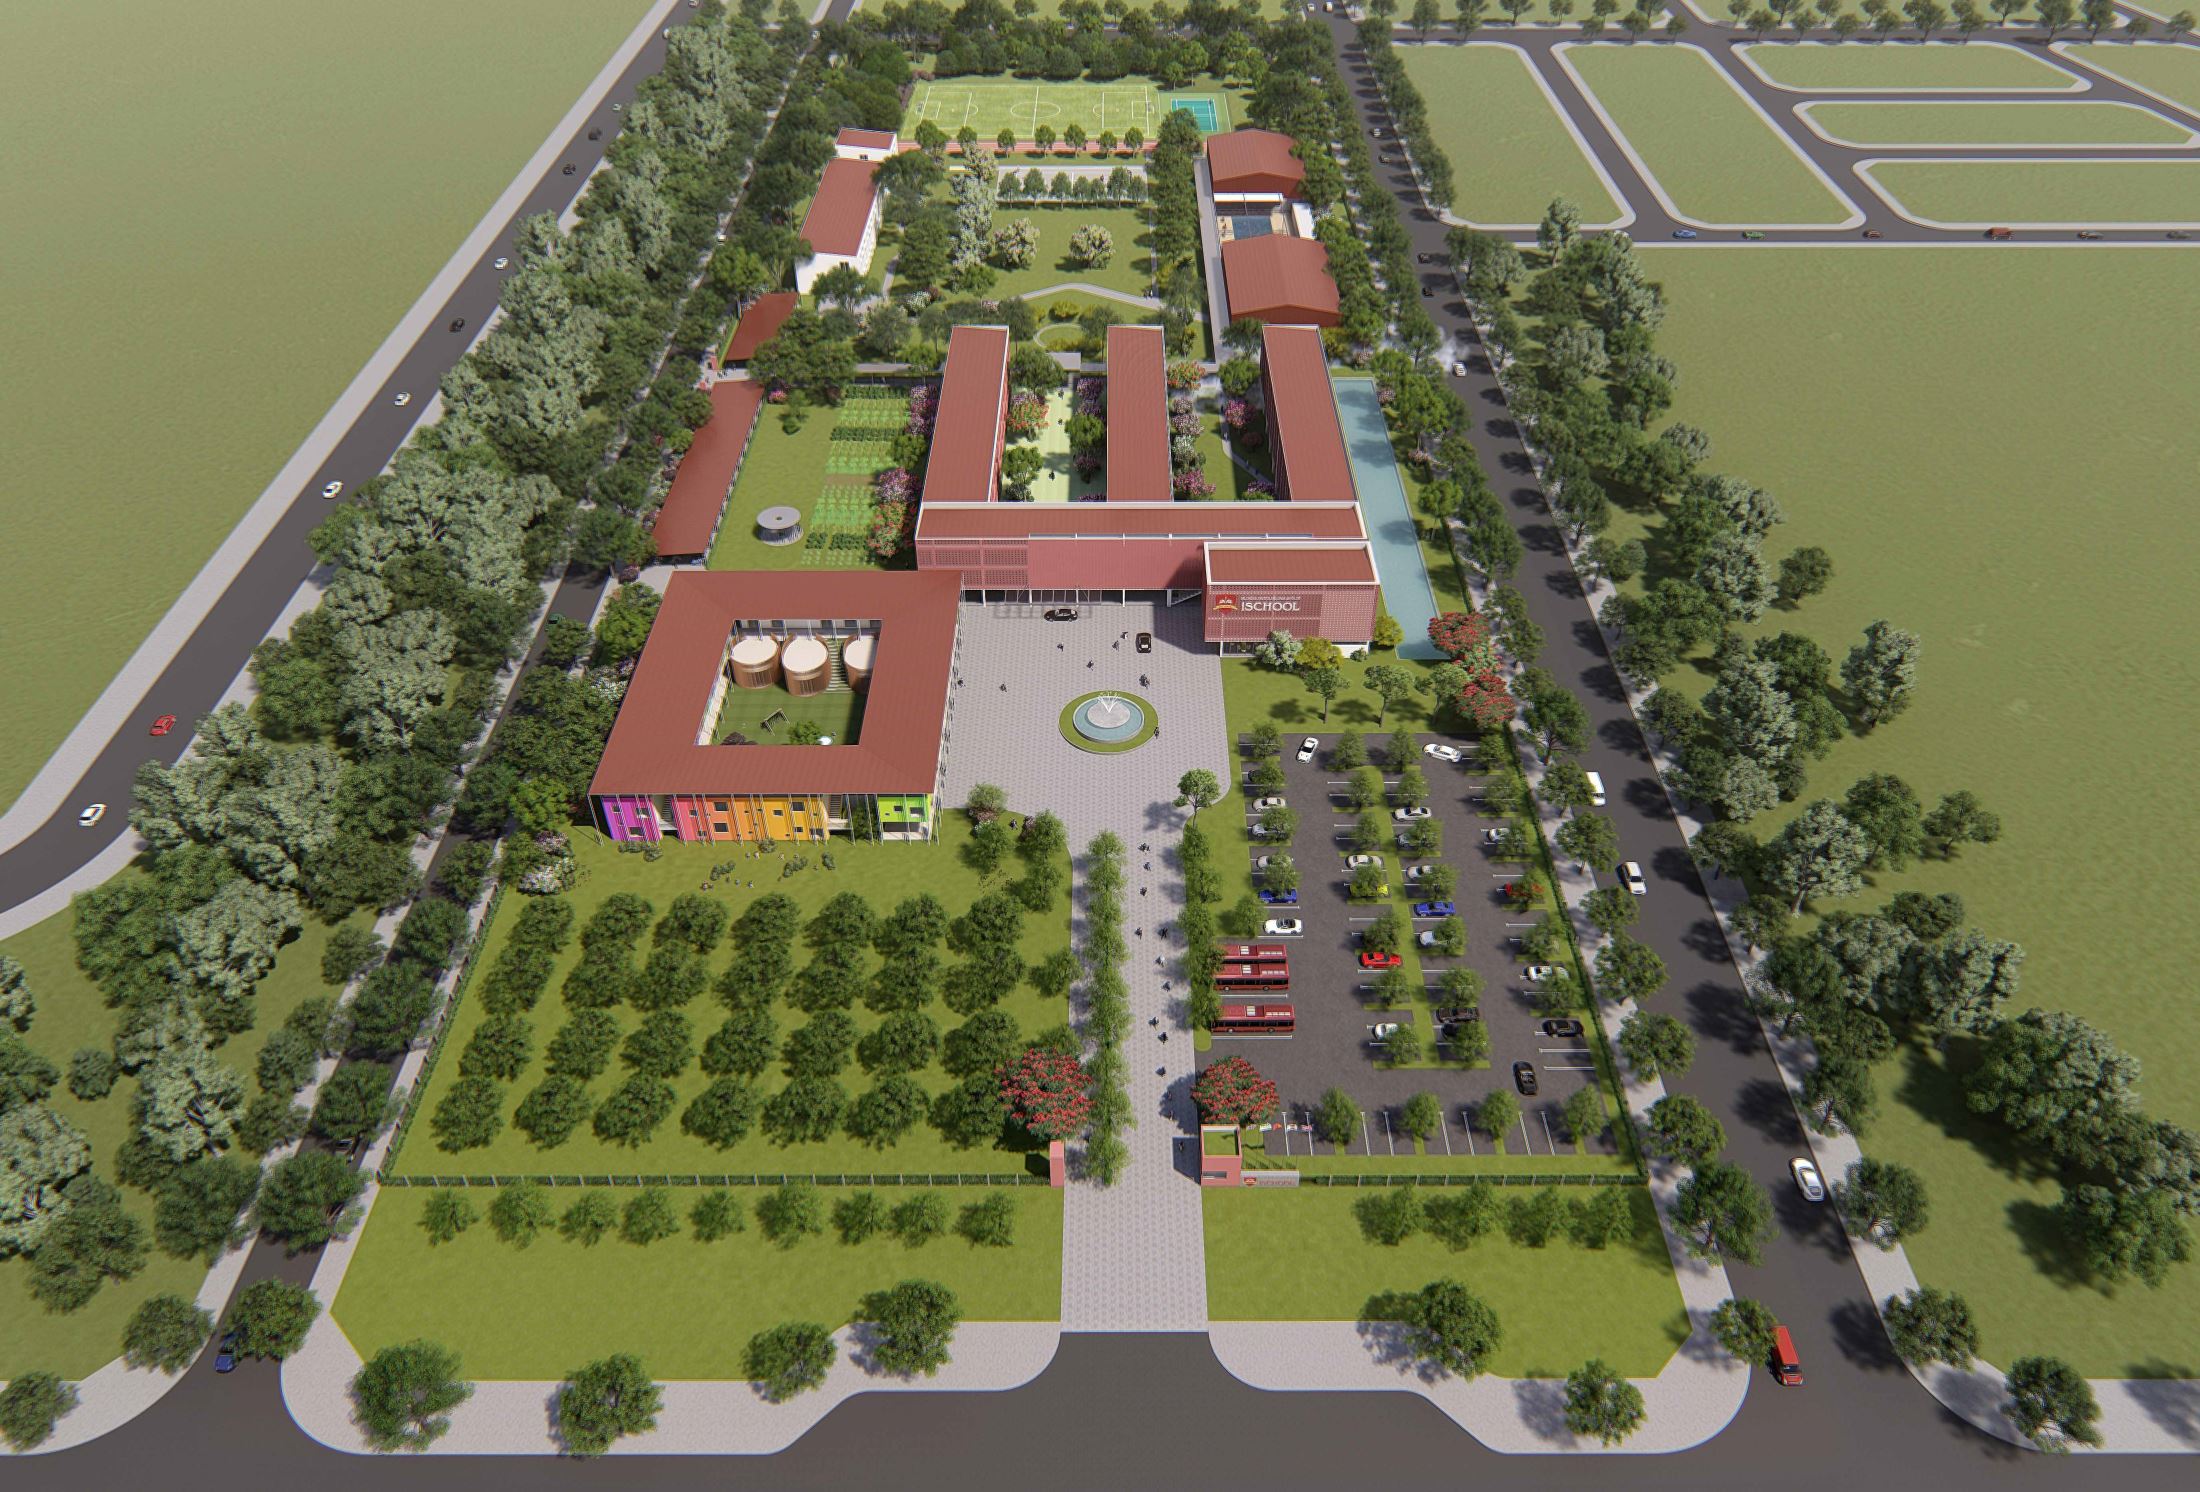 3D Perspective - Overview of iSchool Quang Tri